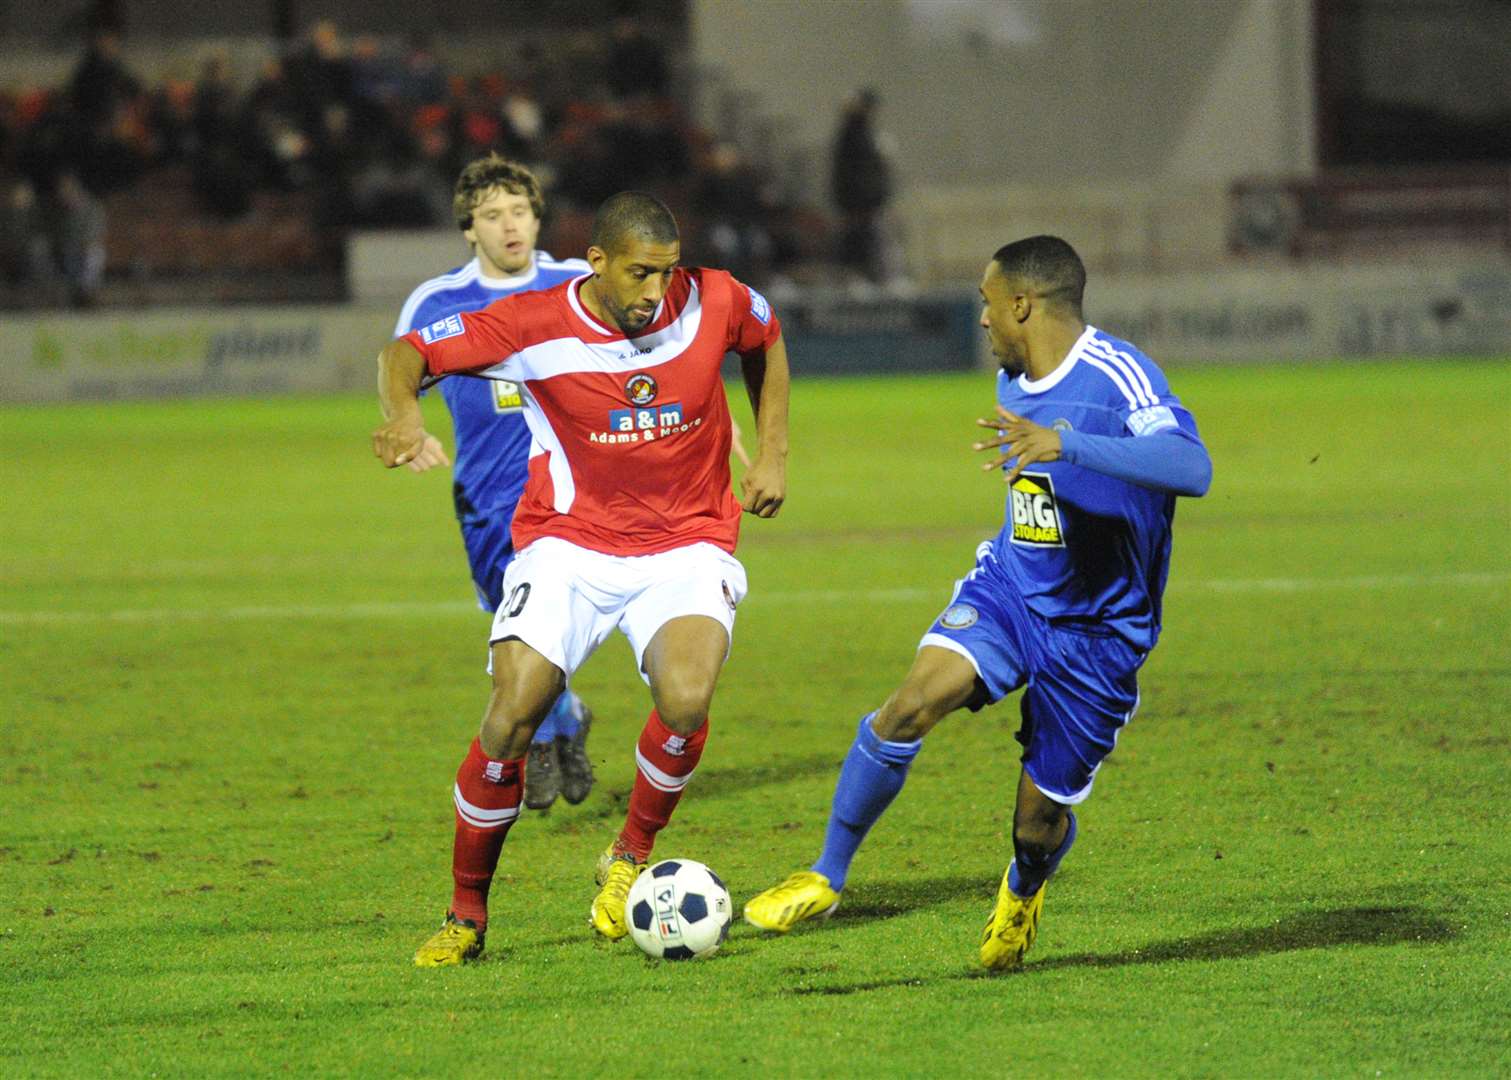 A player from Ebbsfleet against Macclesfield